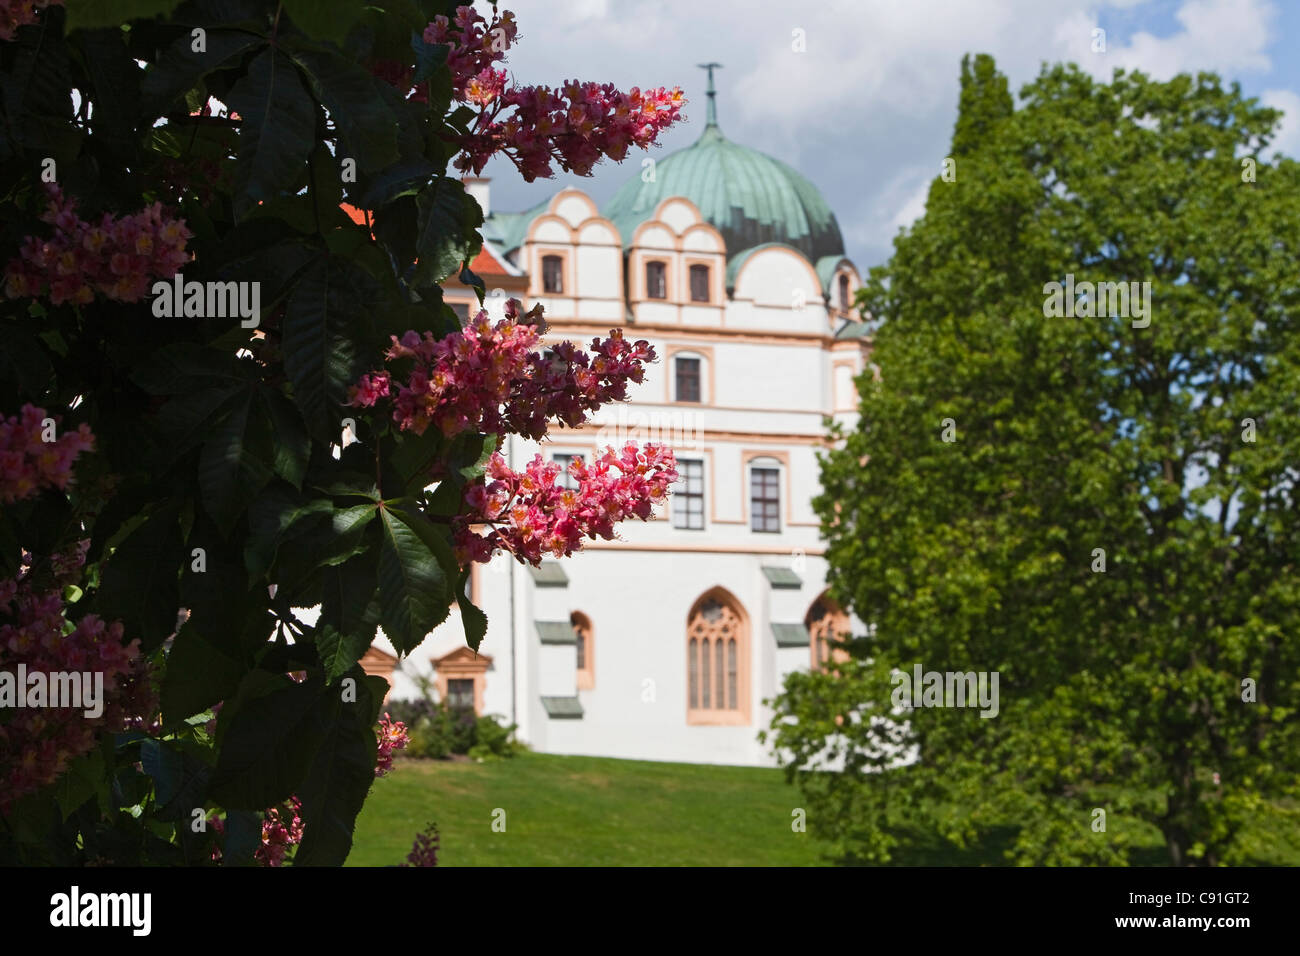 Red blosoms and trees in the castle gardens of Celle castle, Lower Saxony, Germany Stock Photo